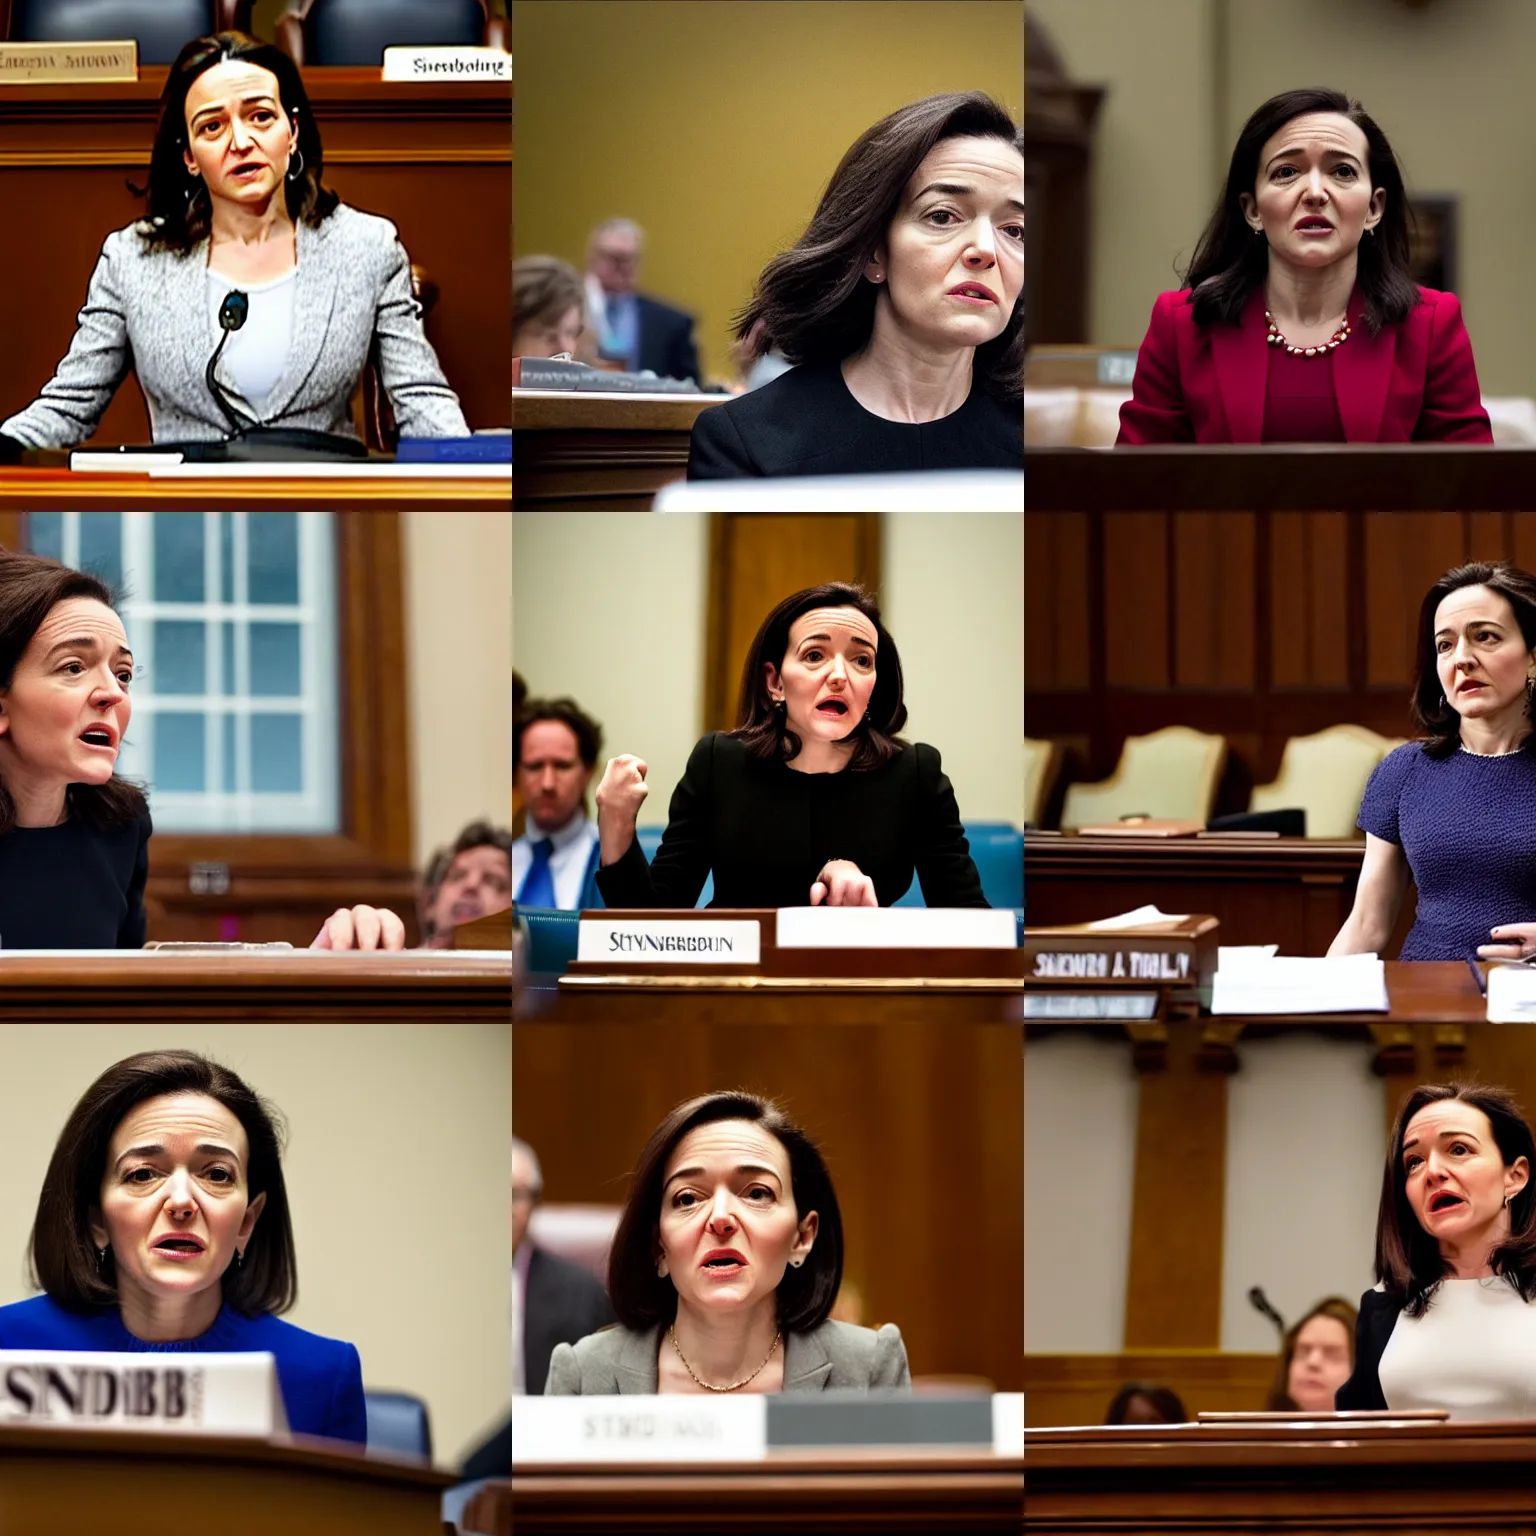 Prompt: Movie still of a snarling, contemptuous Sheryl Sandberg testifying in Congress in Facebook The Movie (2017), directed by Steven Spielberg